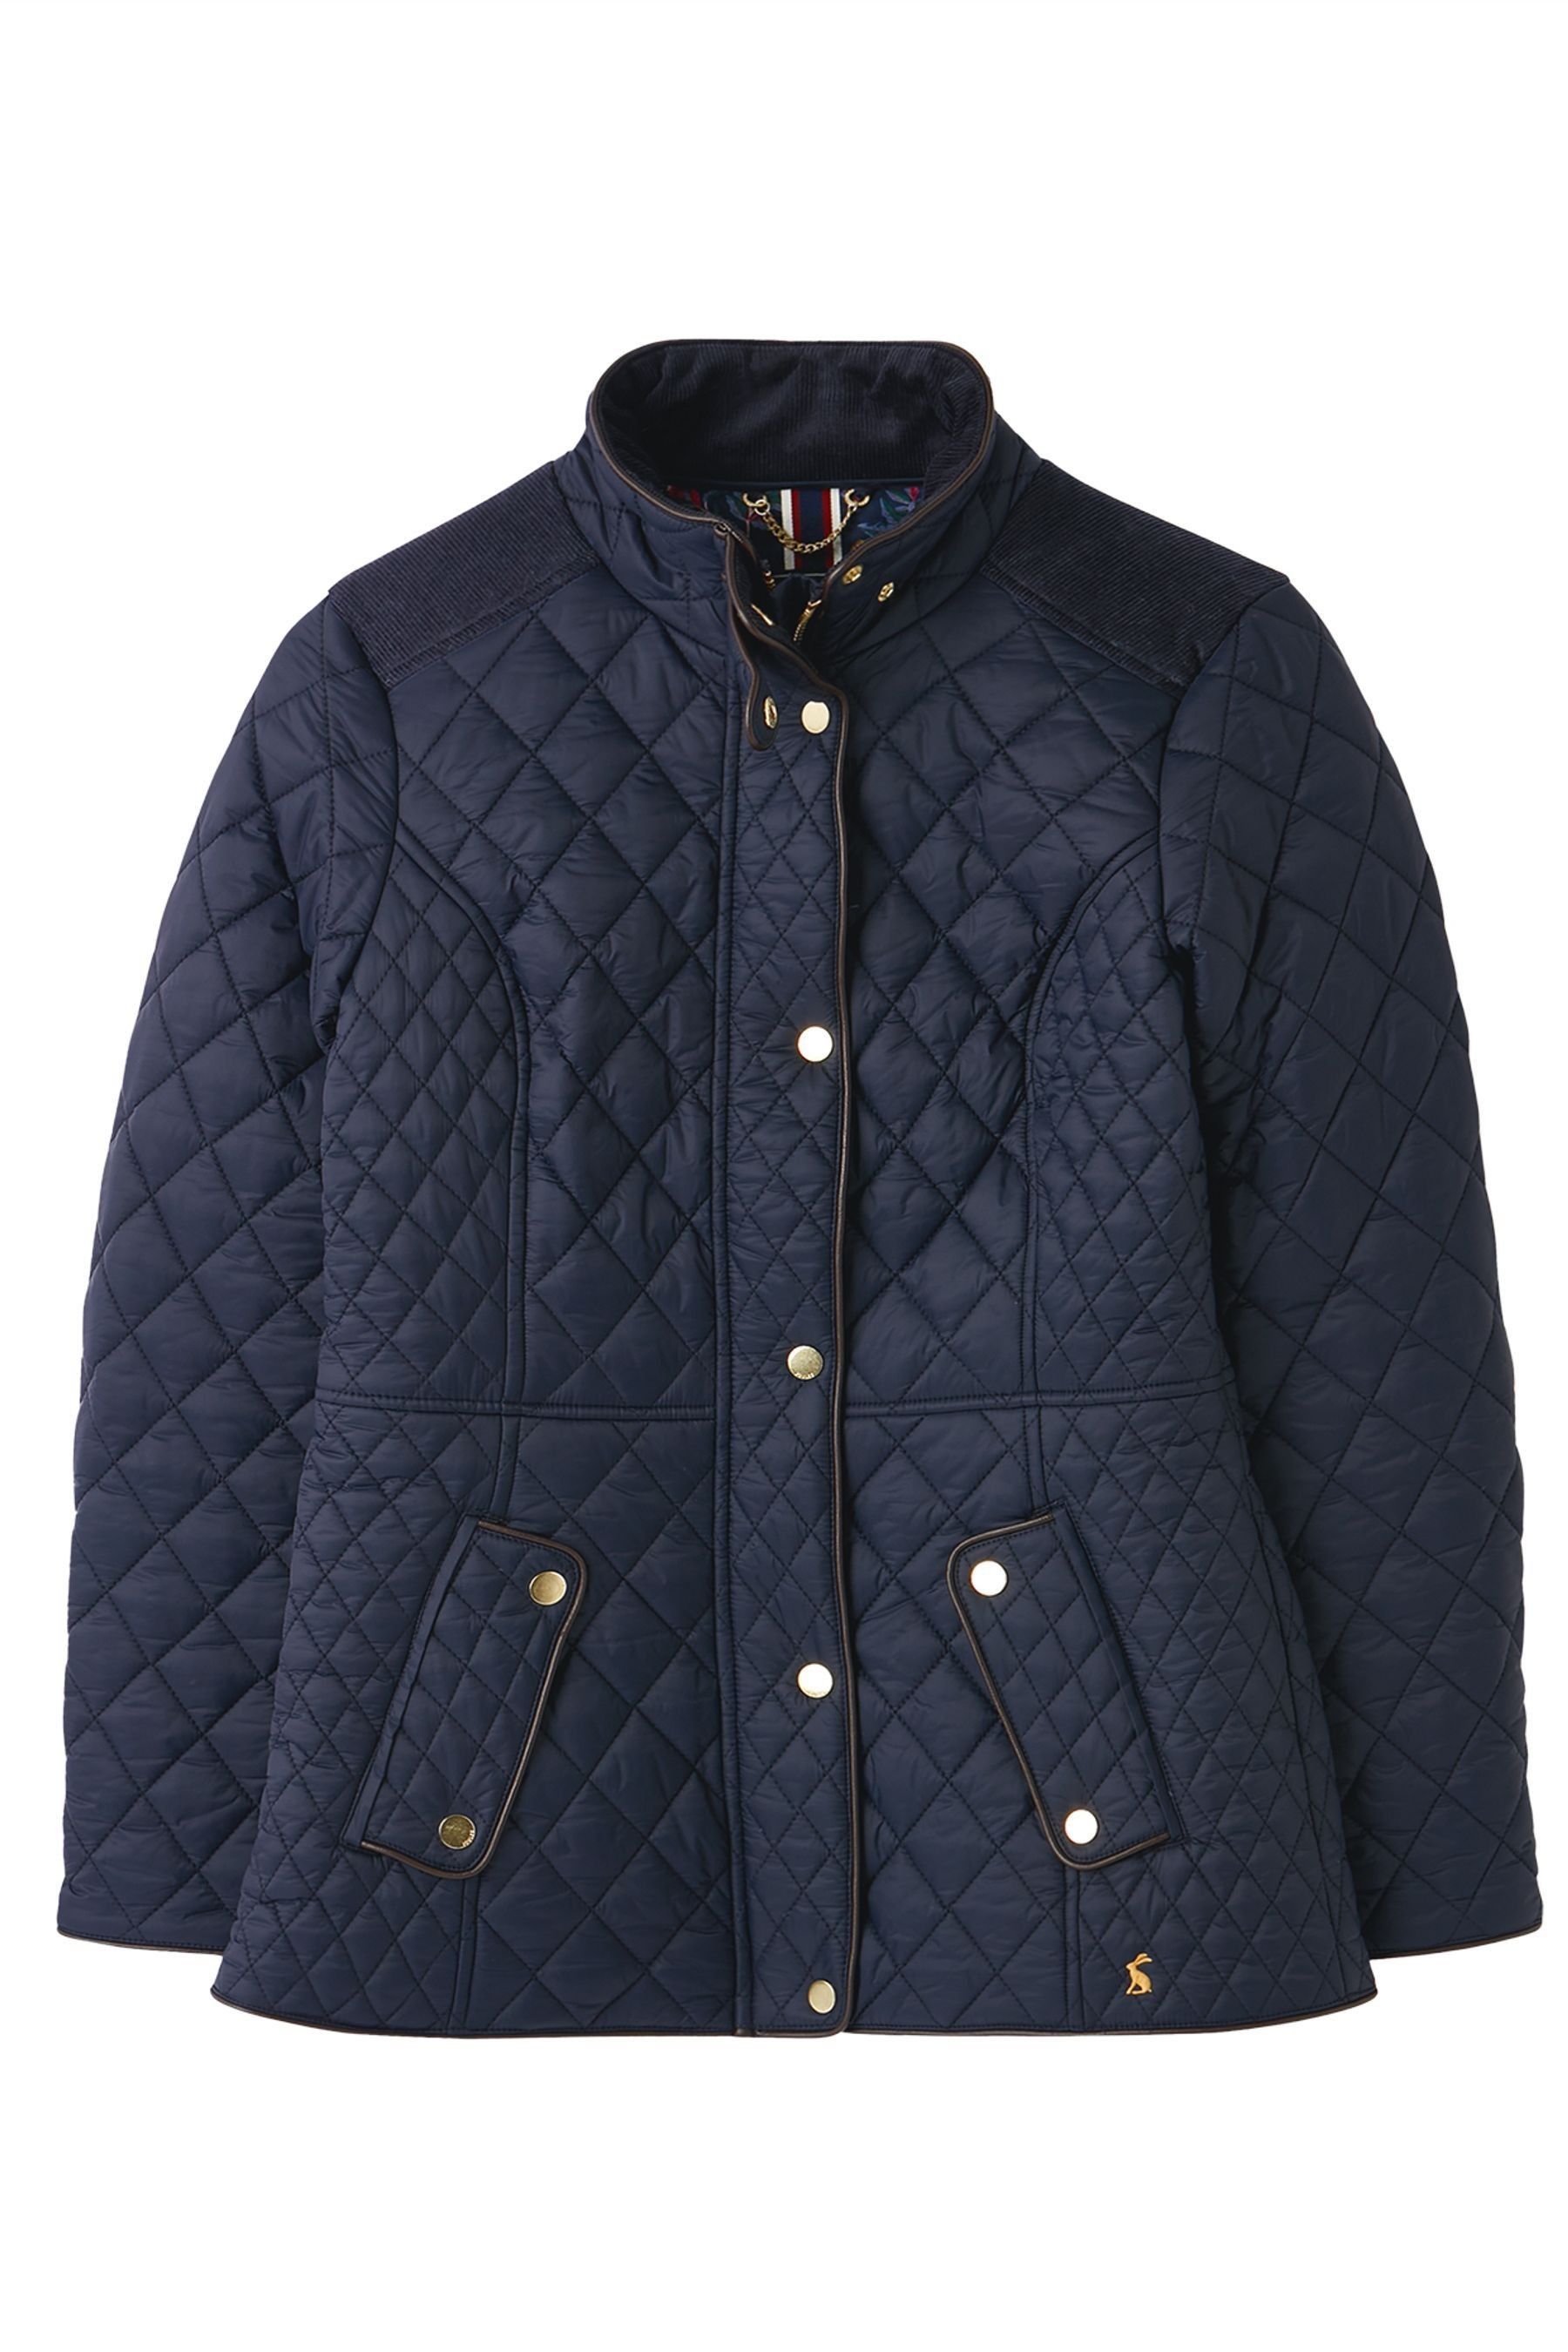 Buy Joules Newdale Quilted Jacket from Next Ireland